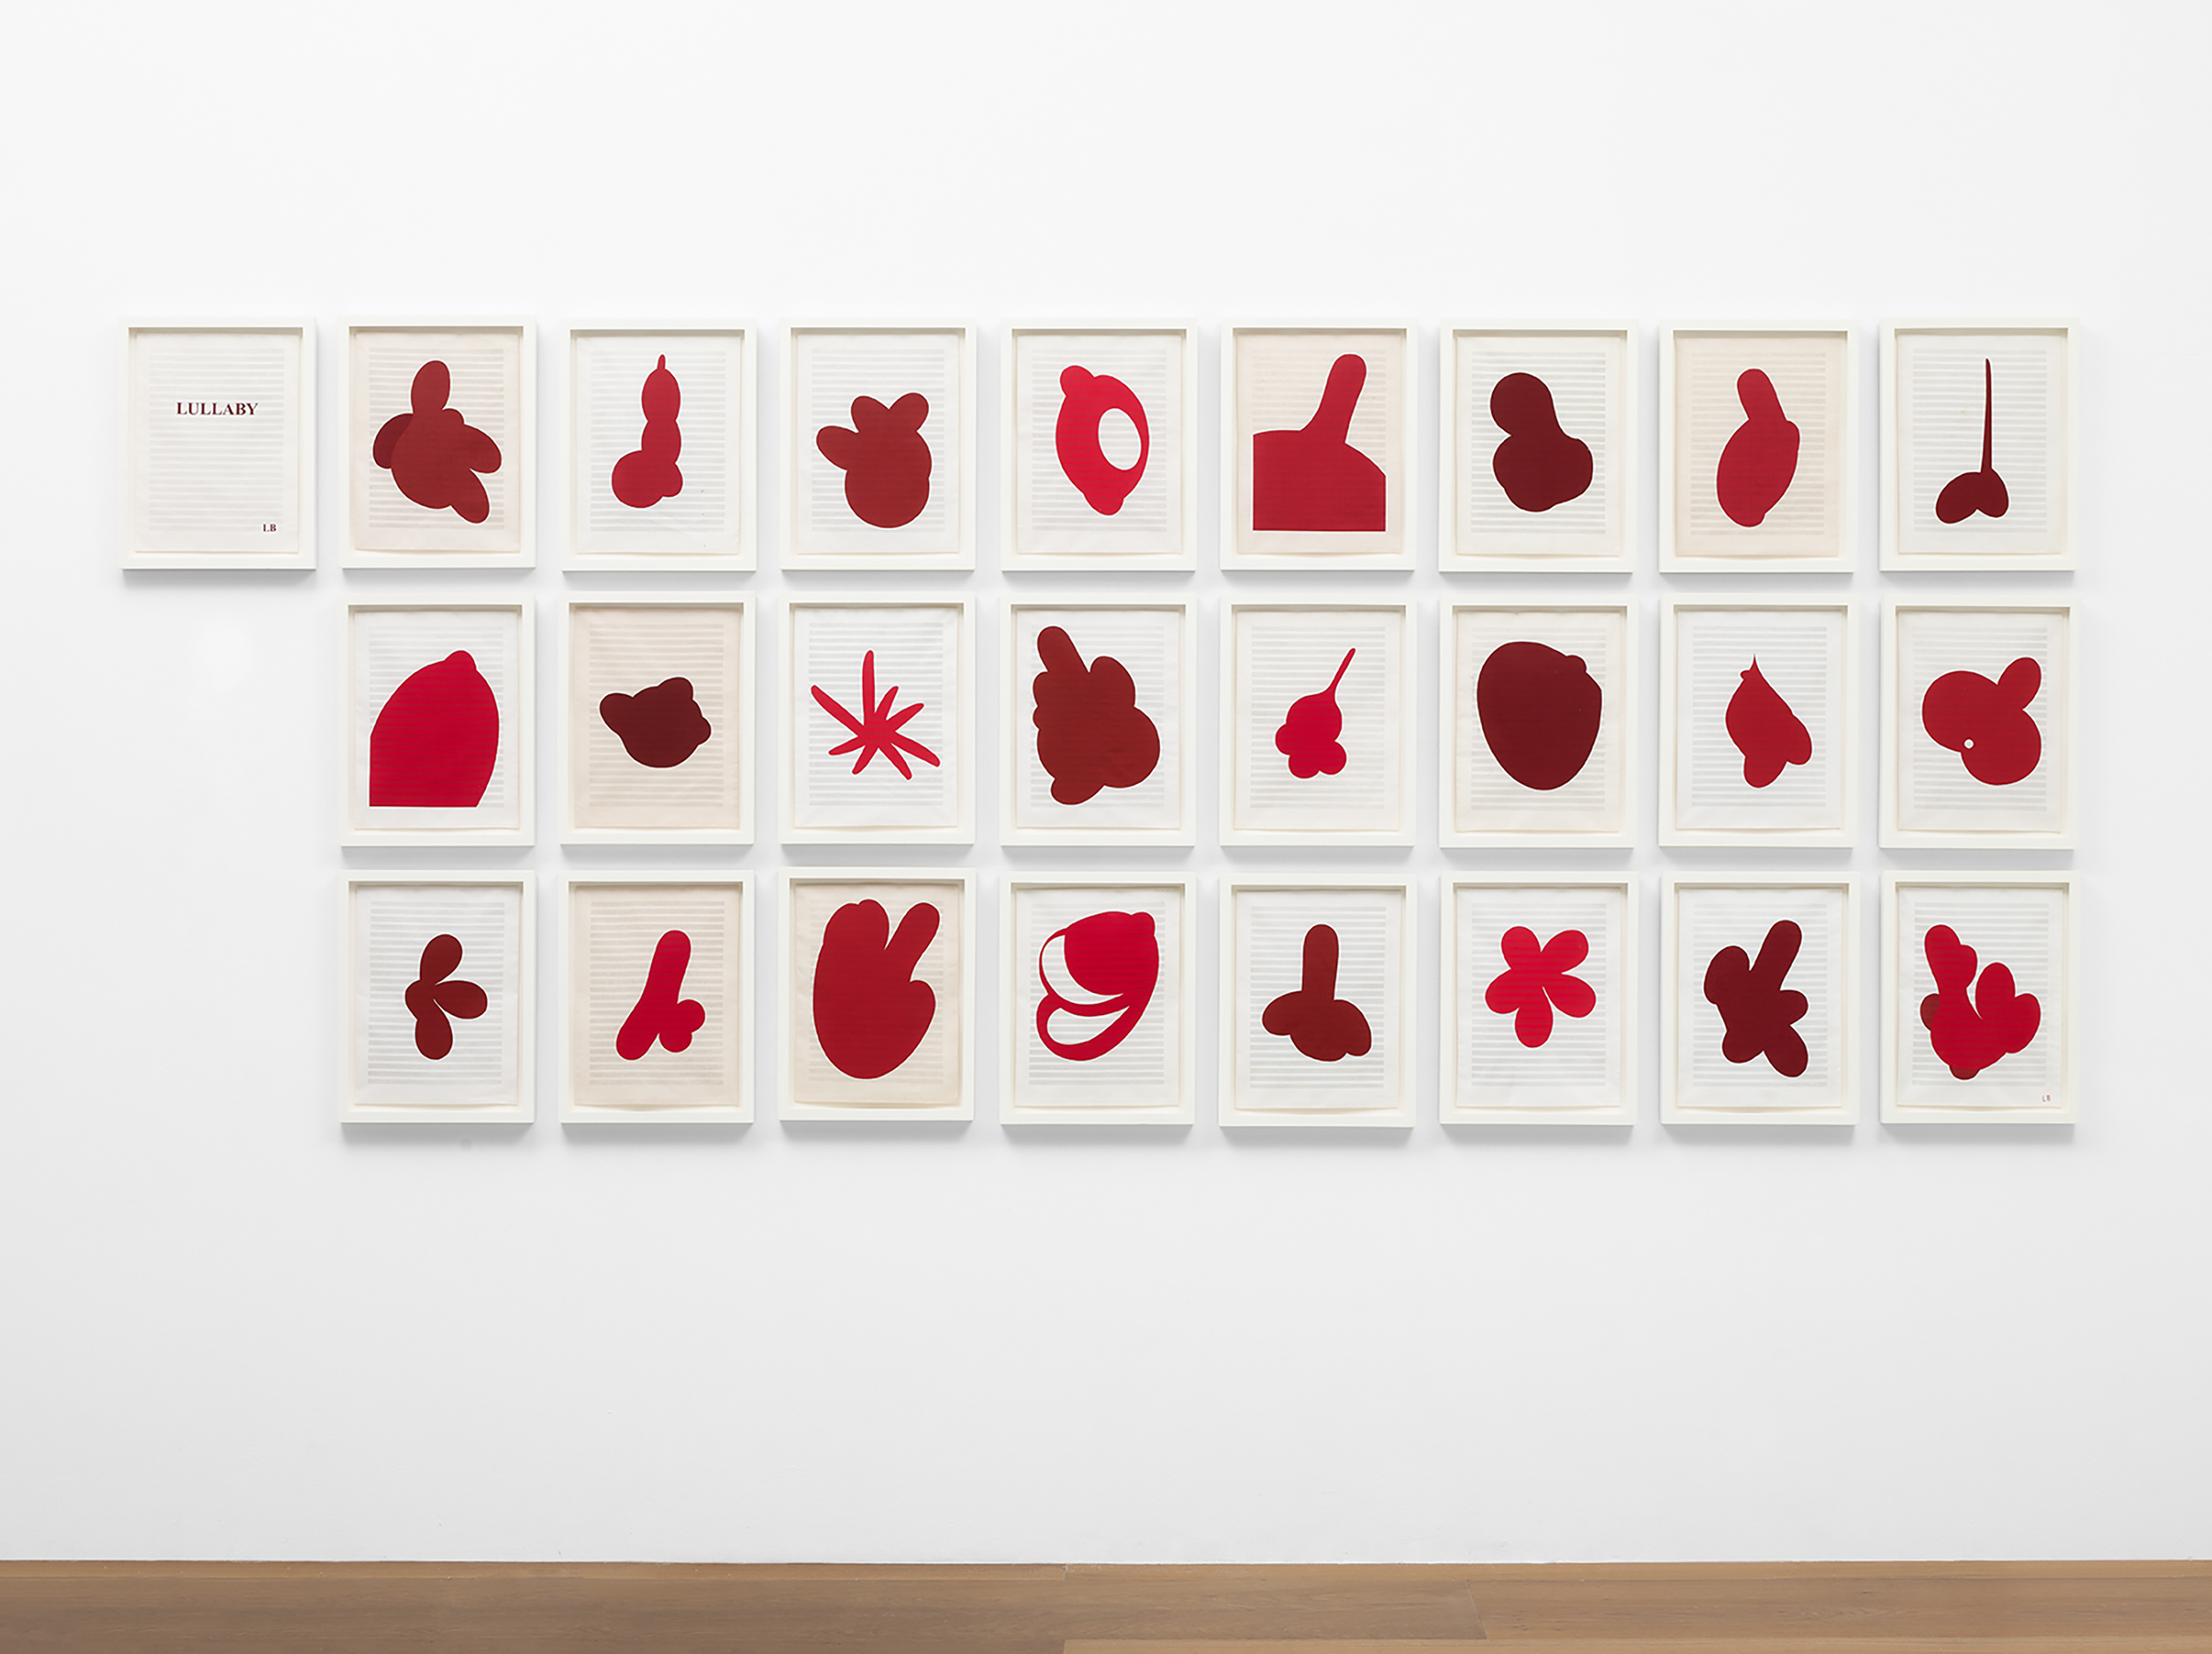 Installation view of Louise Bourgeois's series of 25 screen prints Lullaby